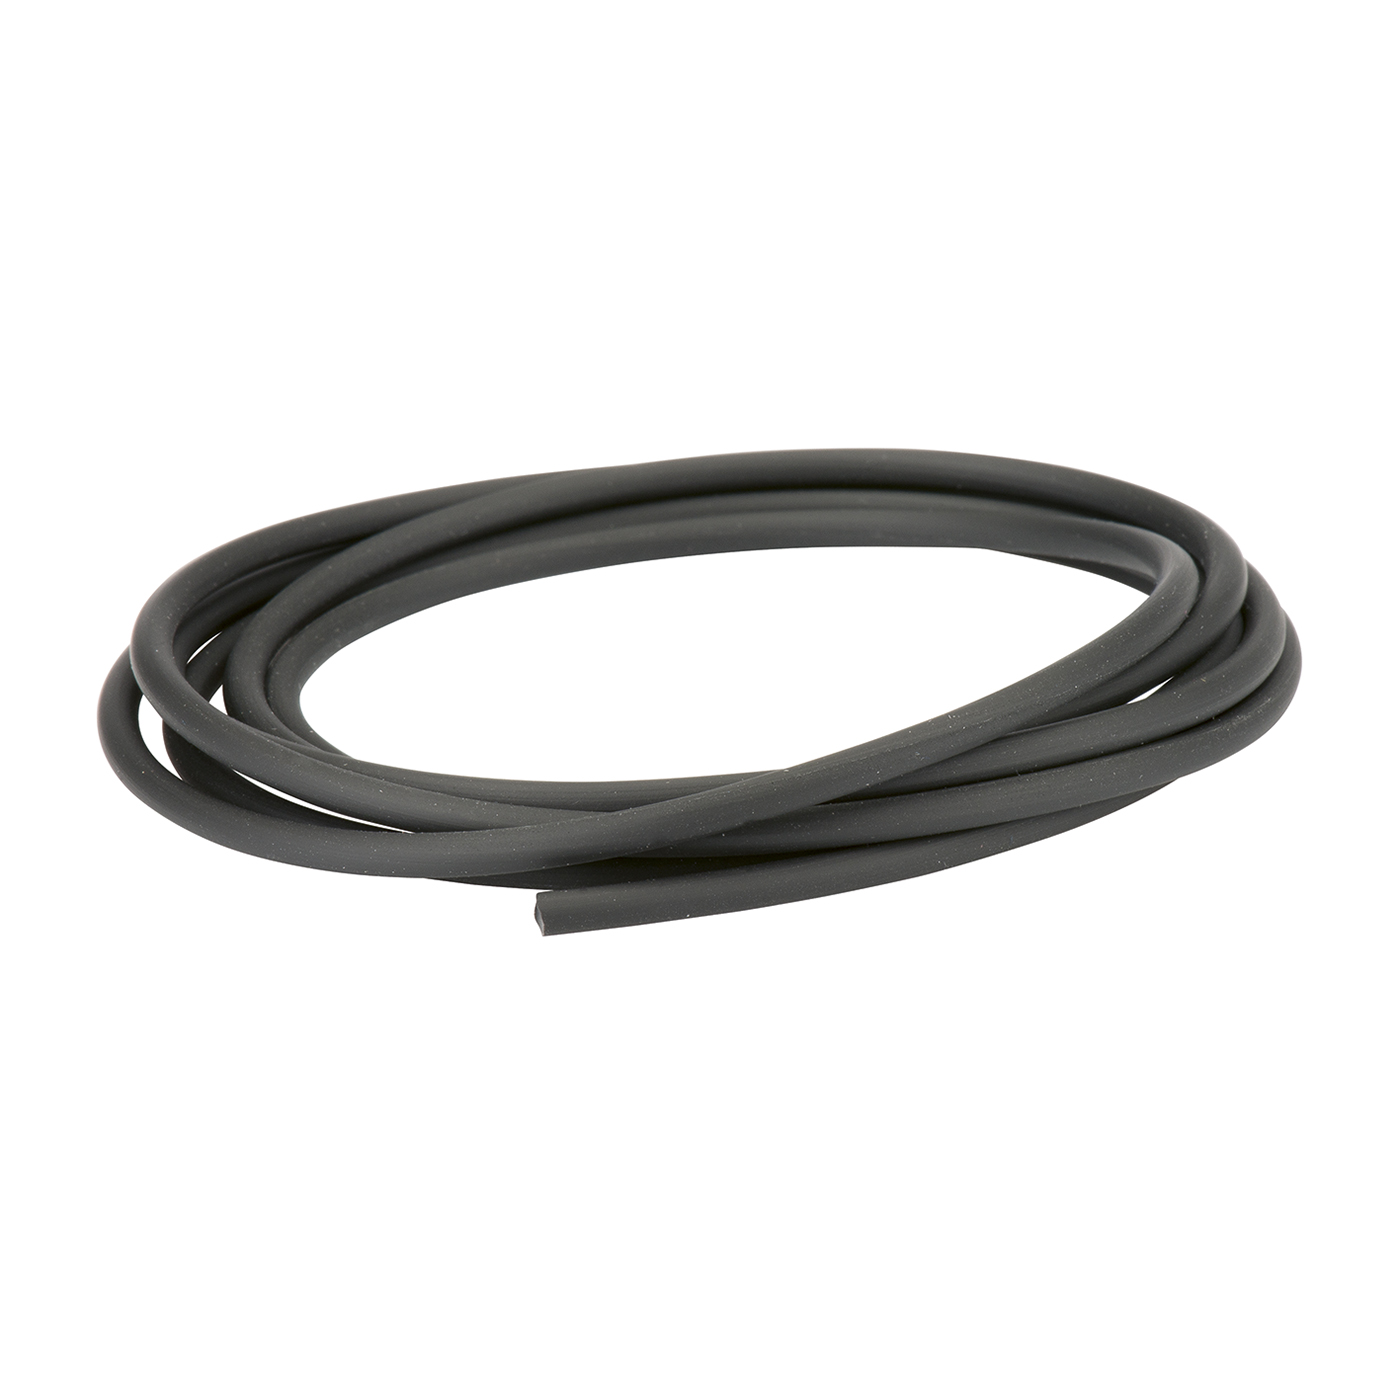 Rubber Cord, ø 3.0 mm, by the Meter - 1 m